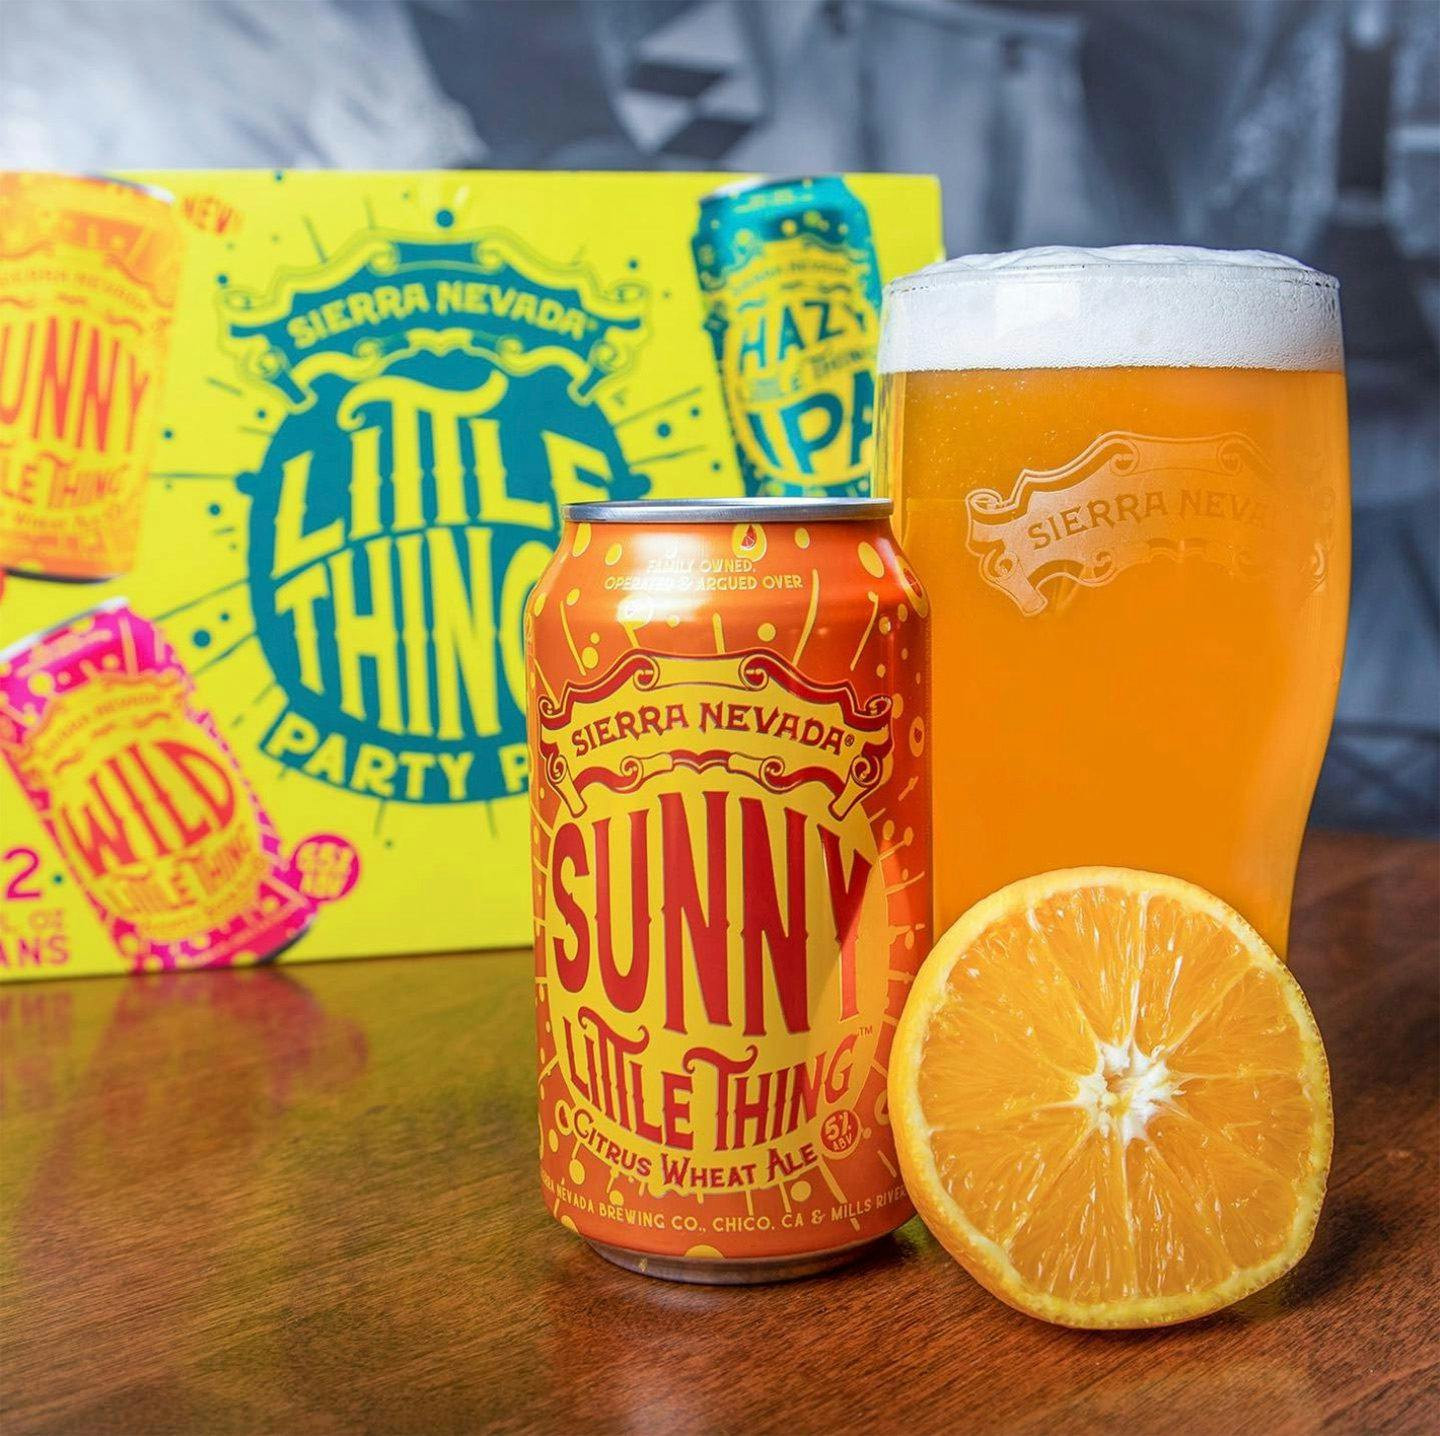 Sunny Little Thing wheat beer with party pack